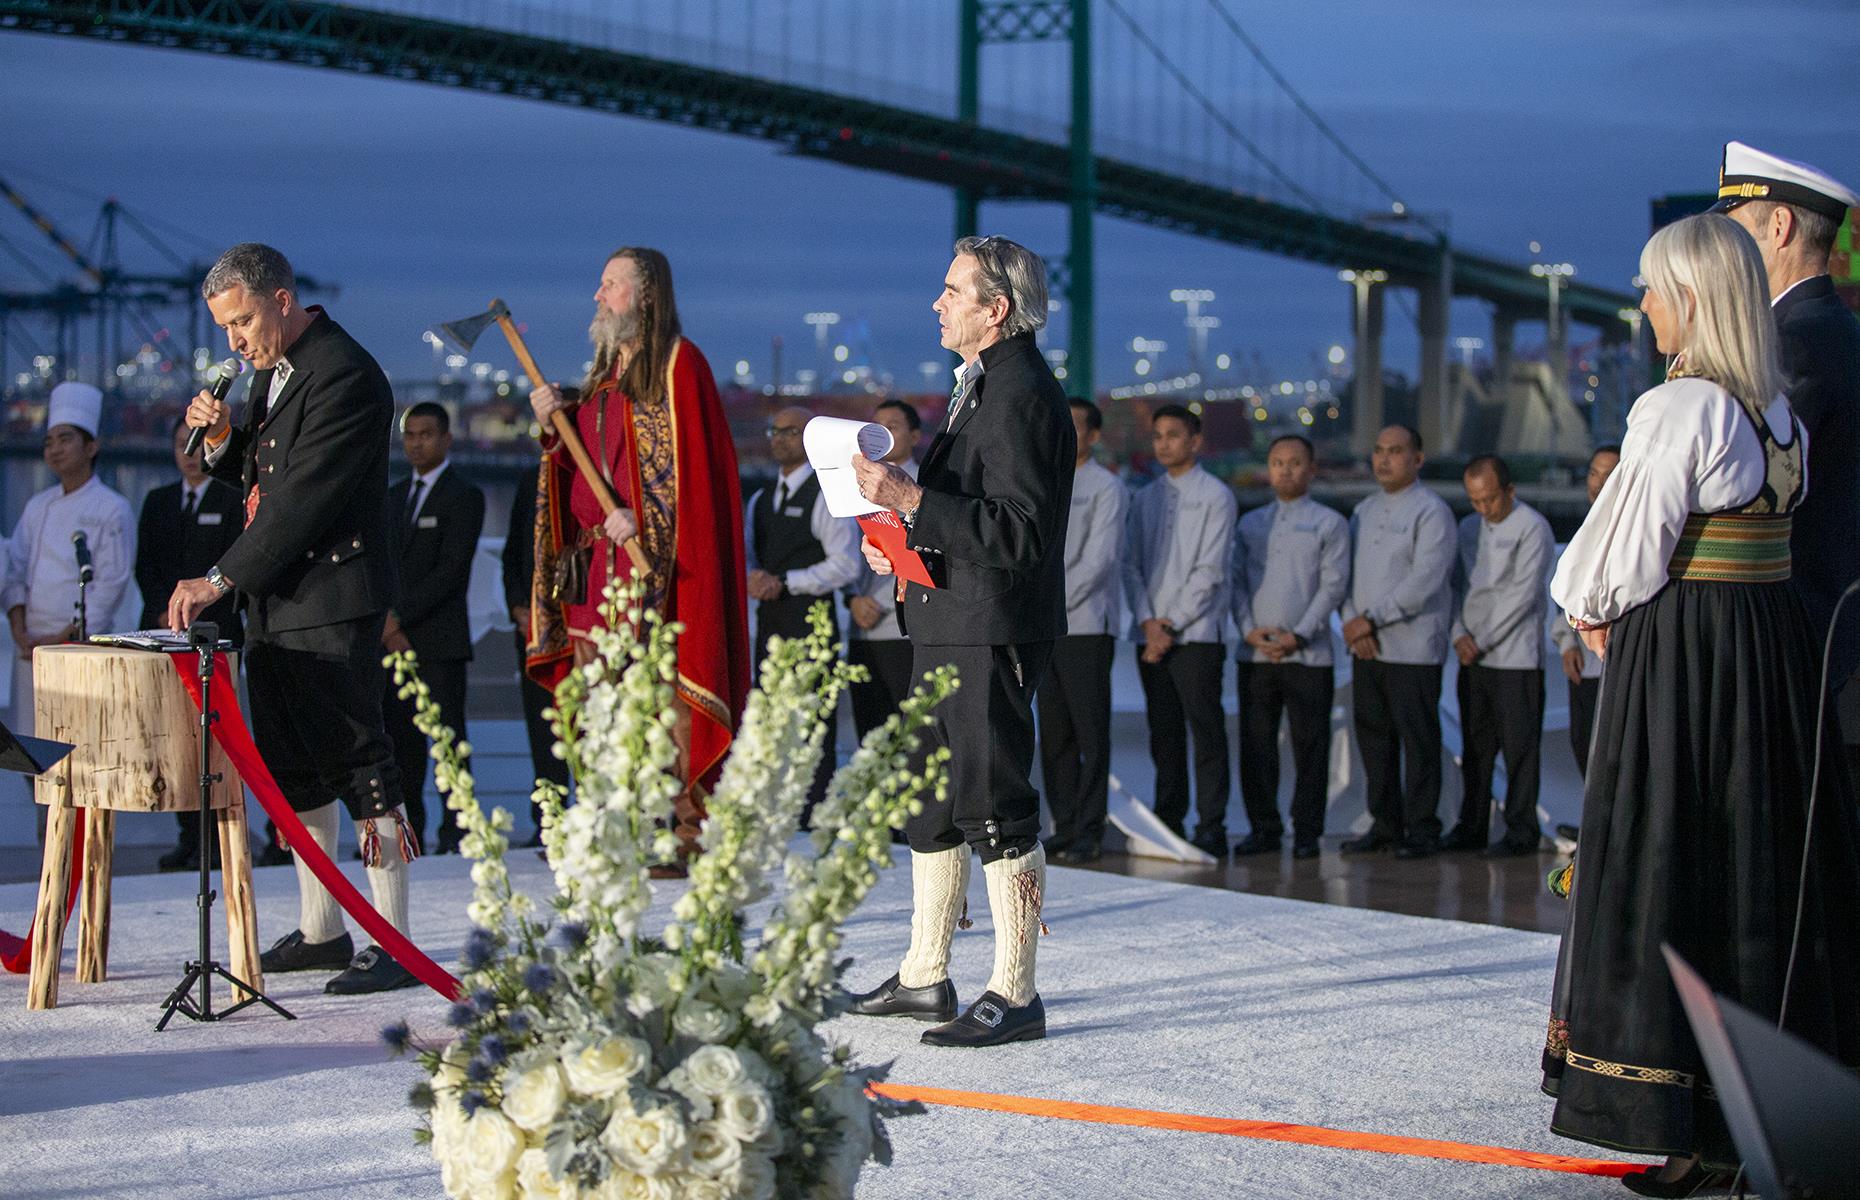 <p>Simply swinging a bottle against the side of a ship is so passé. In January 2023 <a href="https://www.vikingcruises.co.uk">Viking</a> christened new luxury ship Viking Neptune. The ship’s godmother Nicole Stott (a retired NASA astronaut) used a traditional Viking broad axe to cut the rope, which sent a bottle of fizz smashing into the ship. A 13-day Mediterranean Odyssey cruise with Viking costs £4,790 ($5,911).</p>